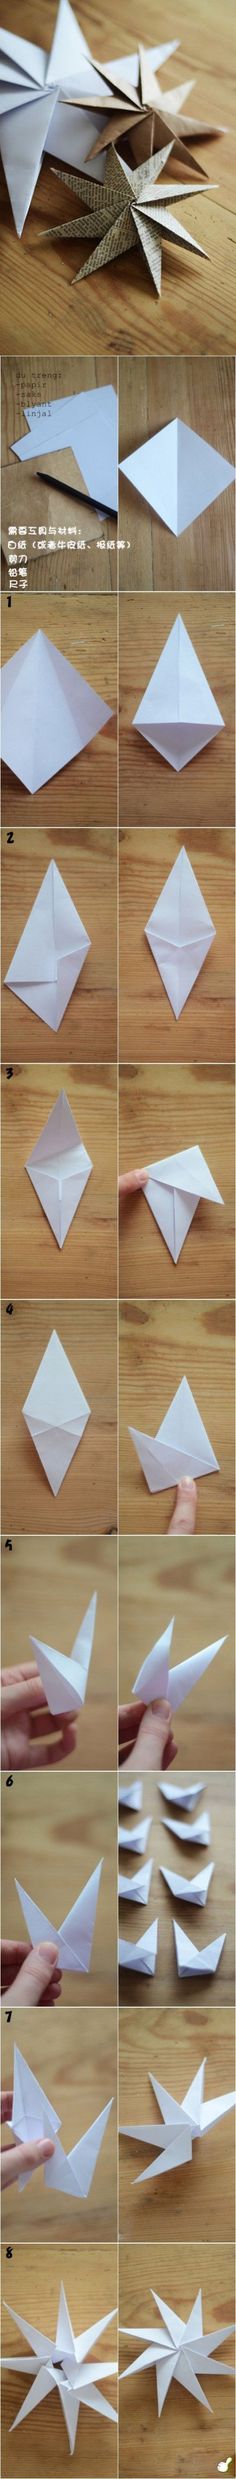 origami multiple pieces instructions